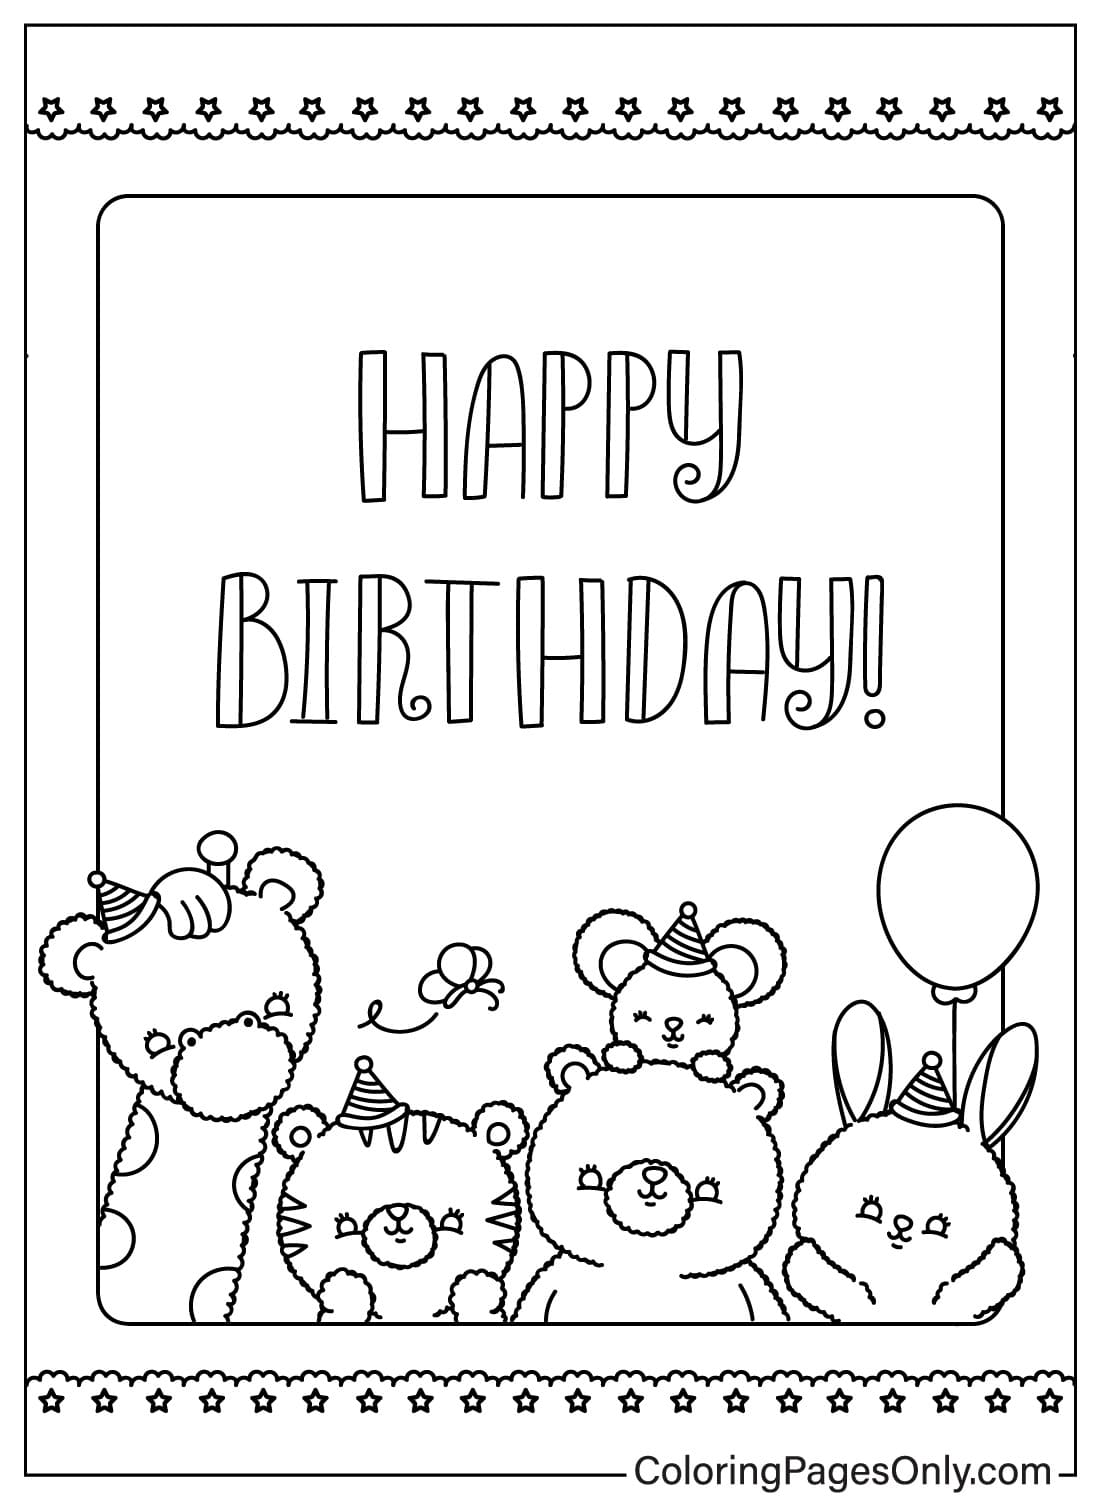 happy birthday card coloring page images free printable coloring pages